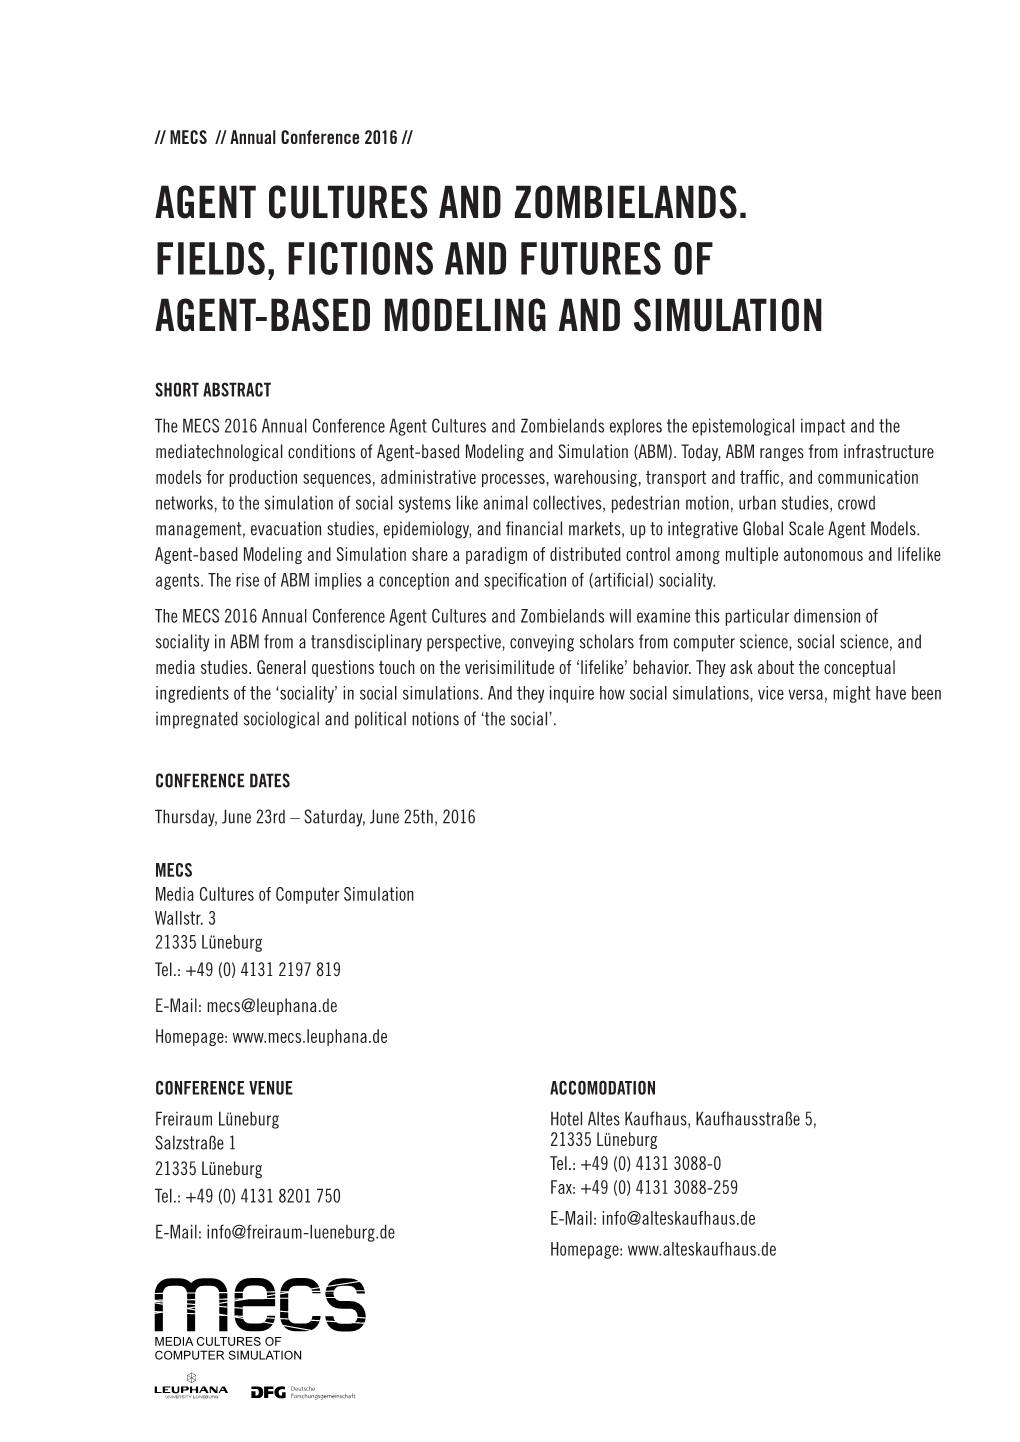 Agent Cultures and Zombielands. Fields, Fictions and Futures of Agent-Based Modeling and Simulation